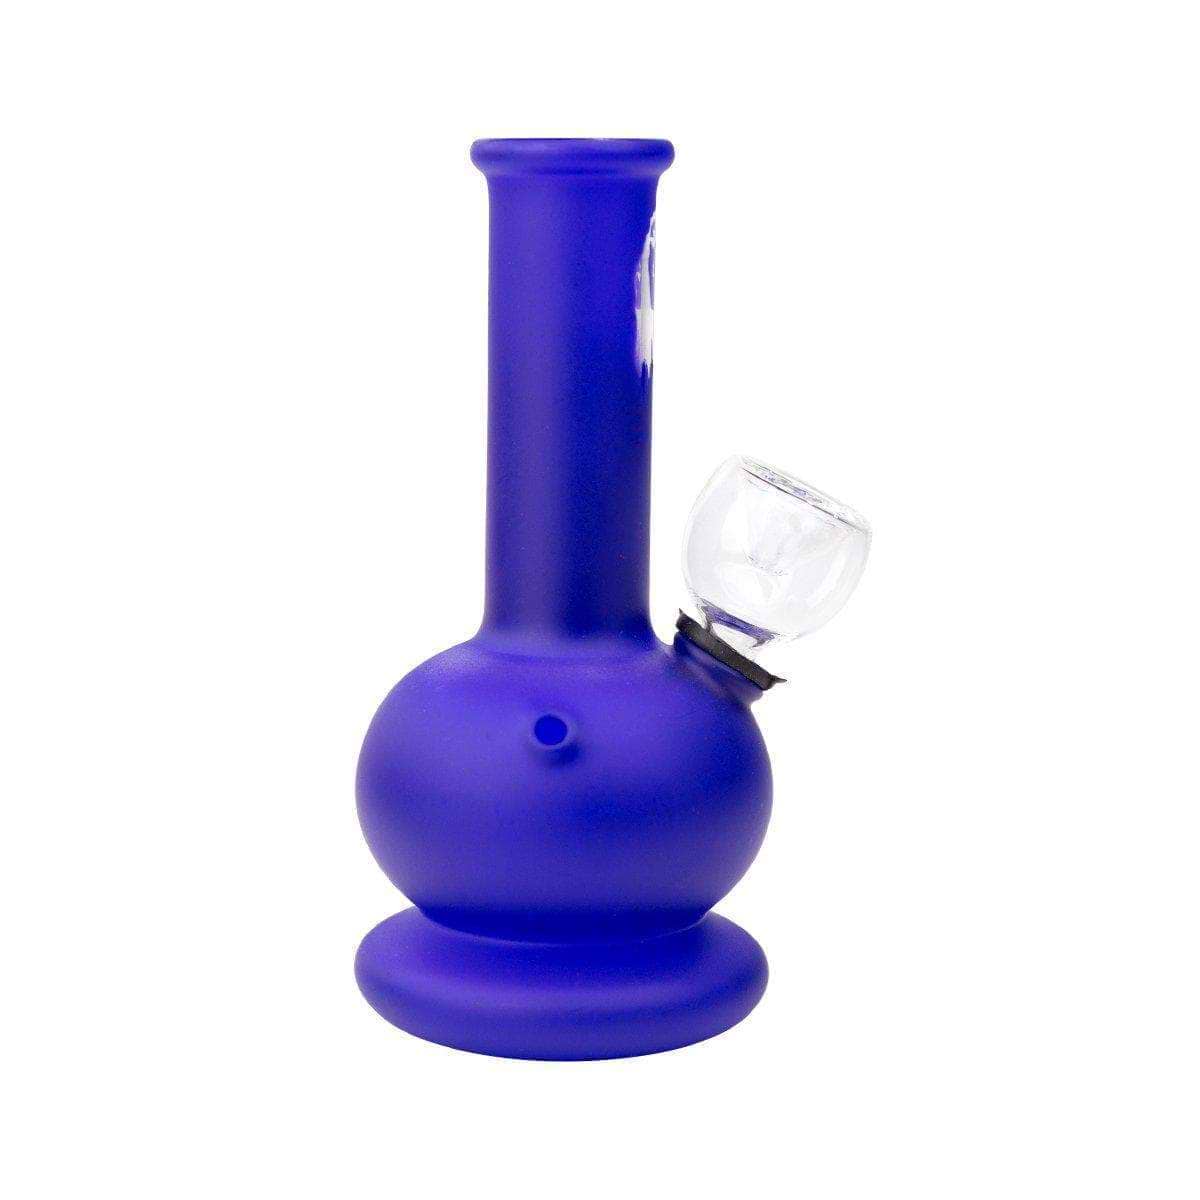 5-inch purple glass carb bong smoking device bright solid color Bob Marley face sillhouette printed on neck